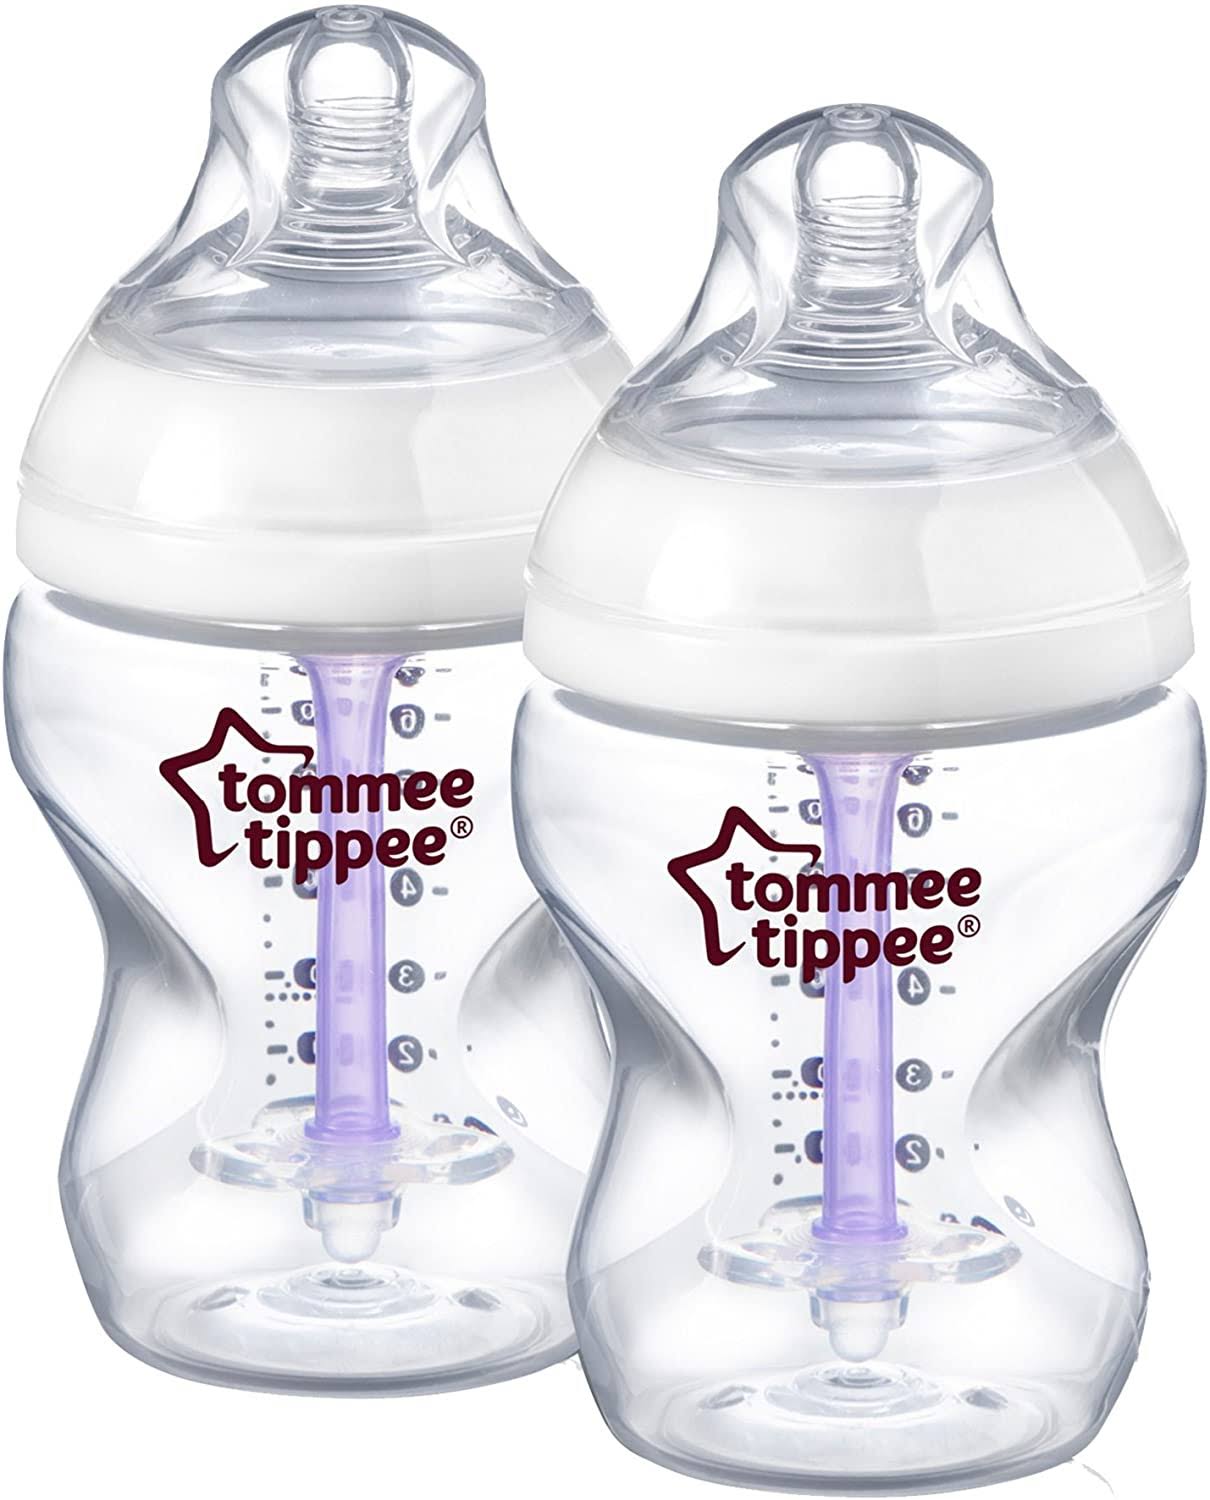 Tommee Tippee Closer to Nature Combat Colic Advanced Comfort Bottles - Slow Flow, 0m+, 260ml